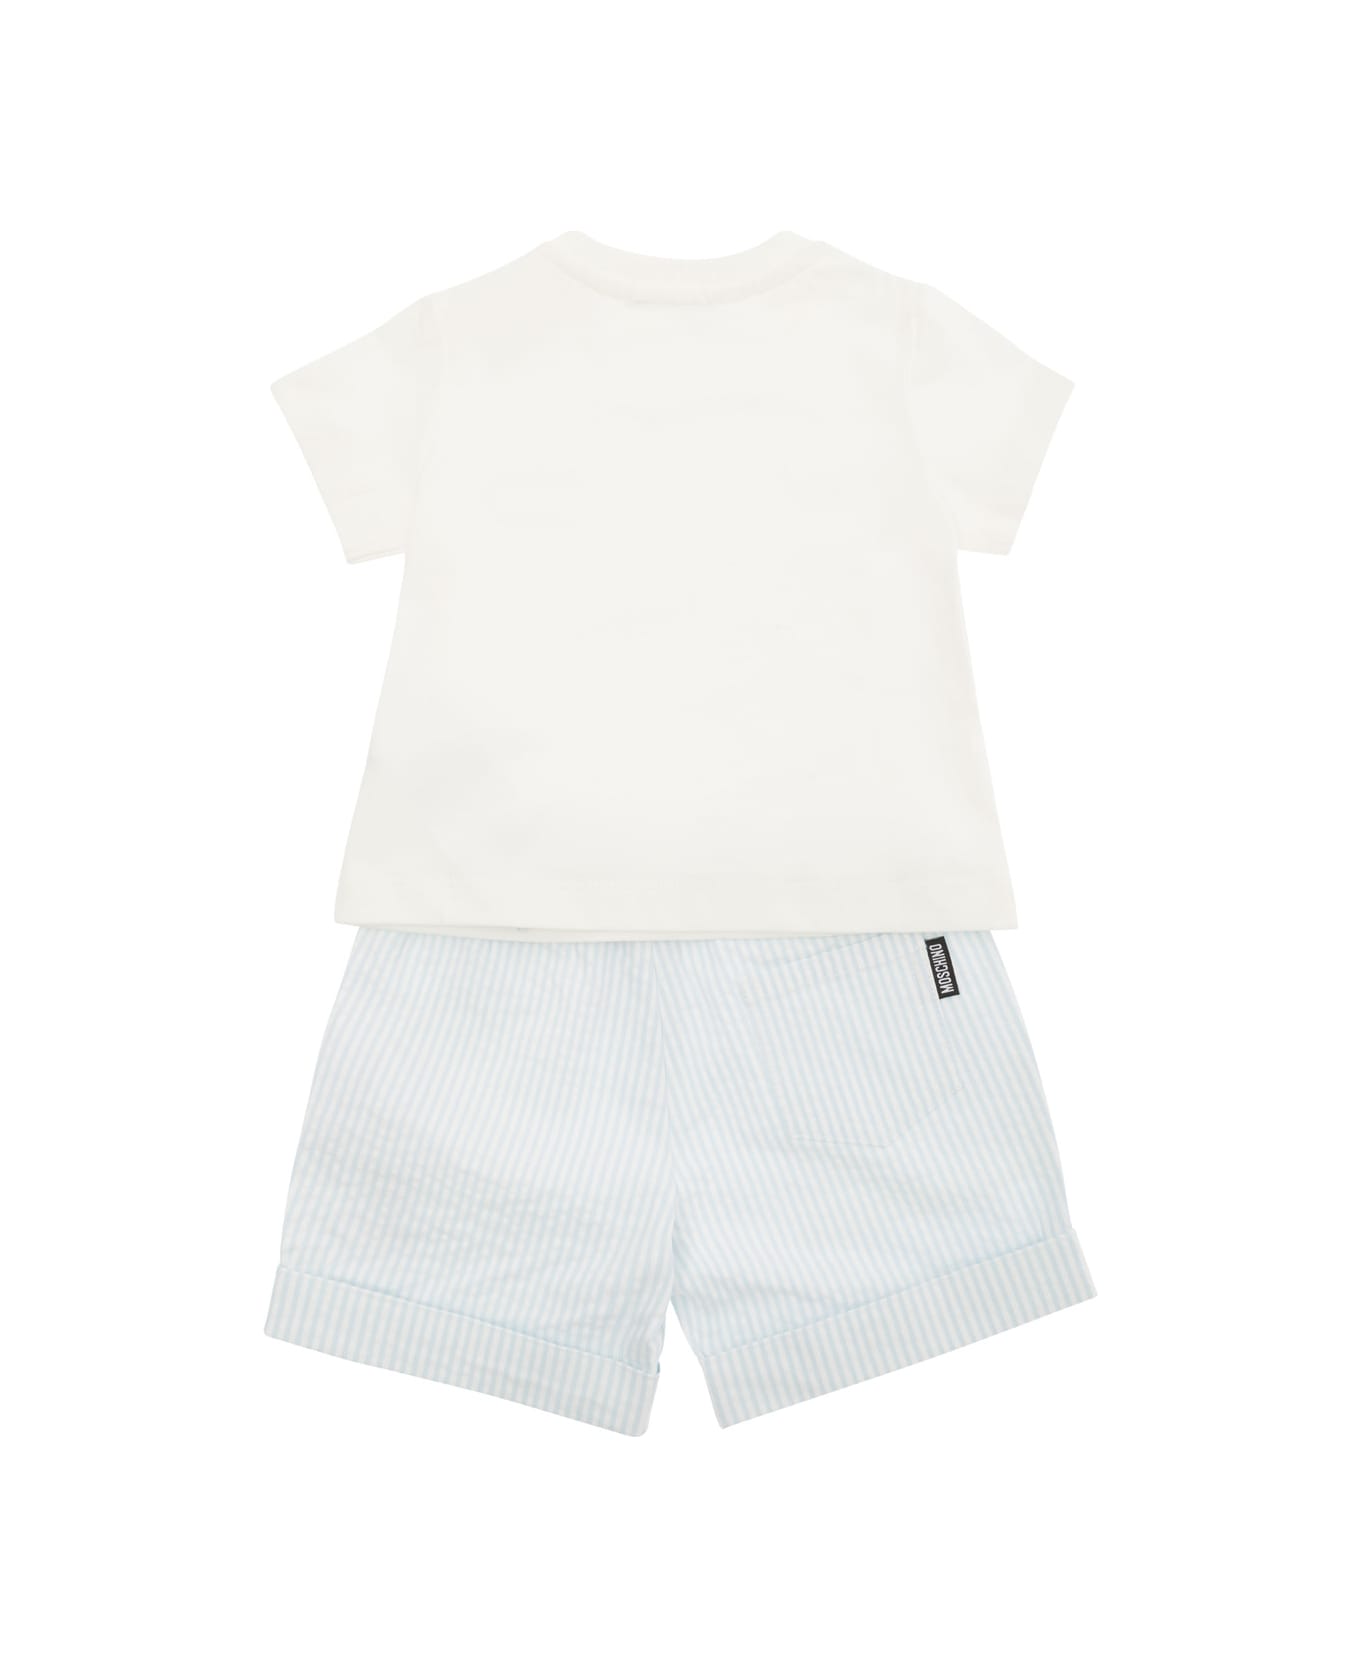 Moschino Light Blue And White T-shirt And Shorts Set In Stretch Cotton Baby - White